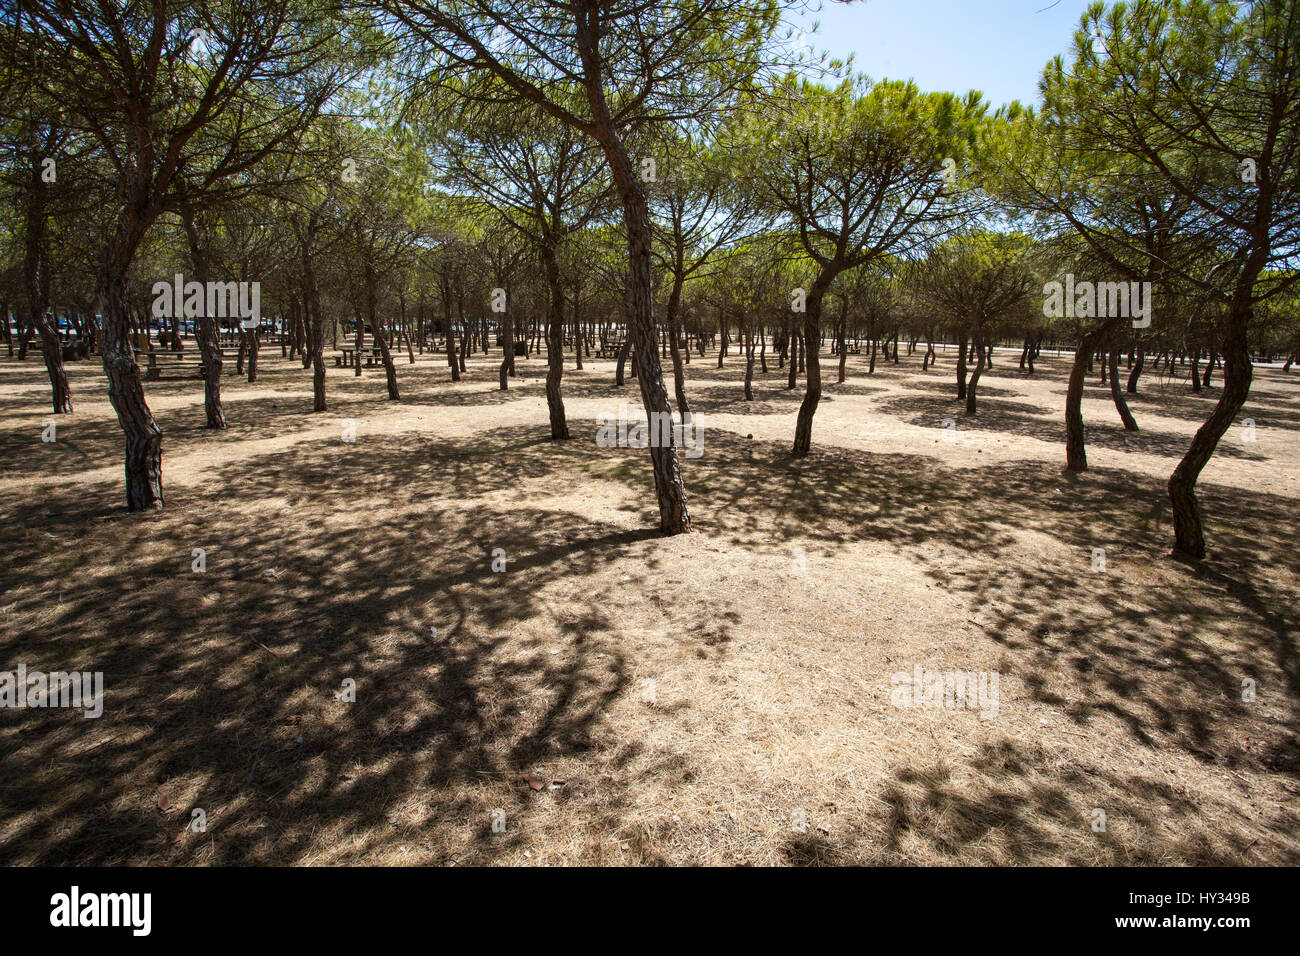 DONANA N.P., SEVILLE, SPAIN: Endemic Stone pine, Umbrella pine or Parasol pine (Pinus pinea) forest on a sunny day creating shadows on the ground. Stock Photo